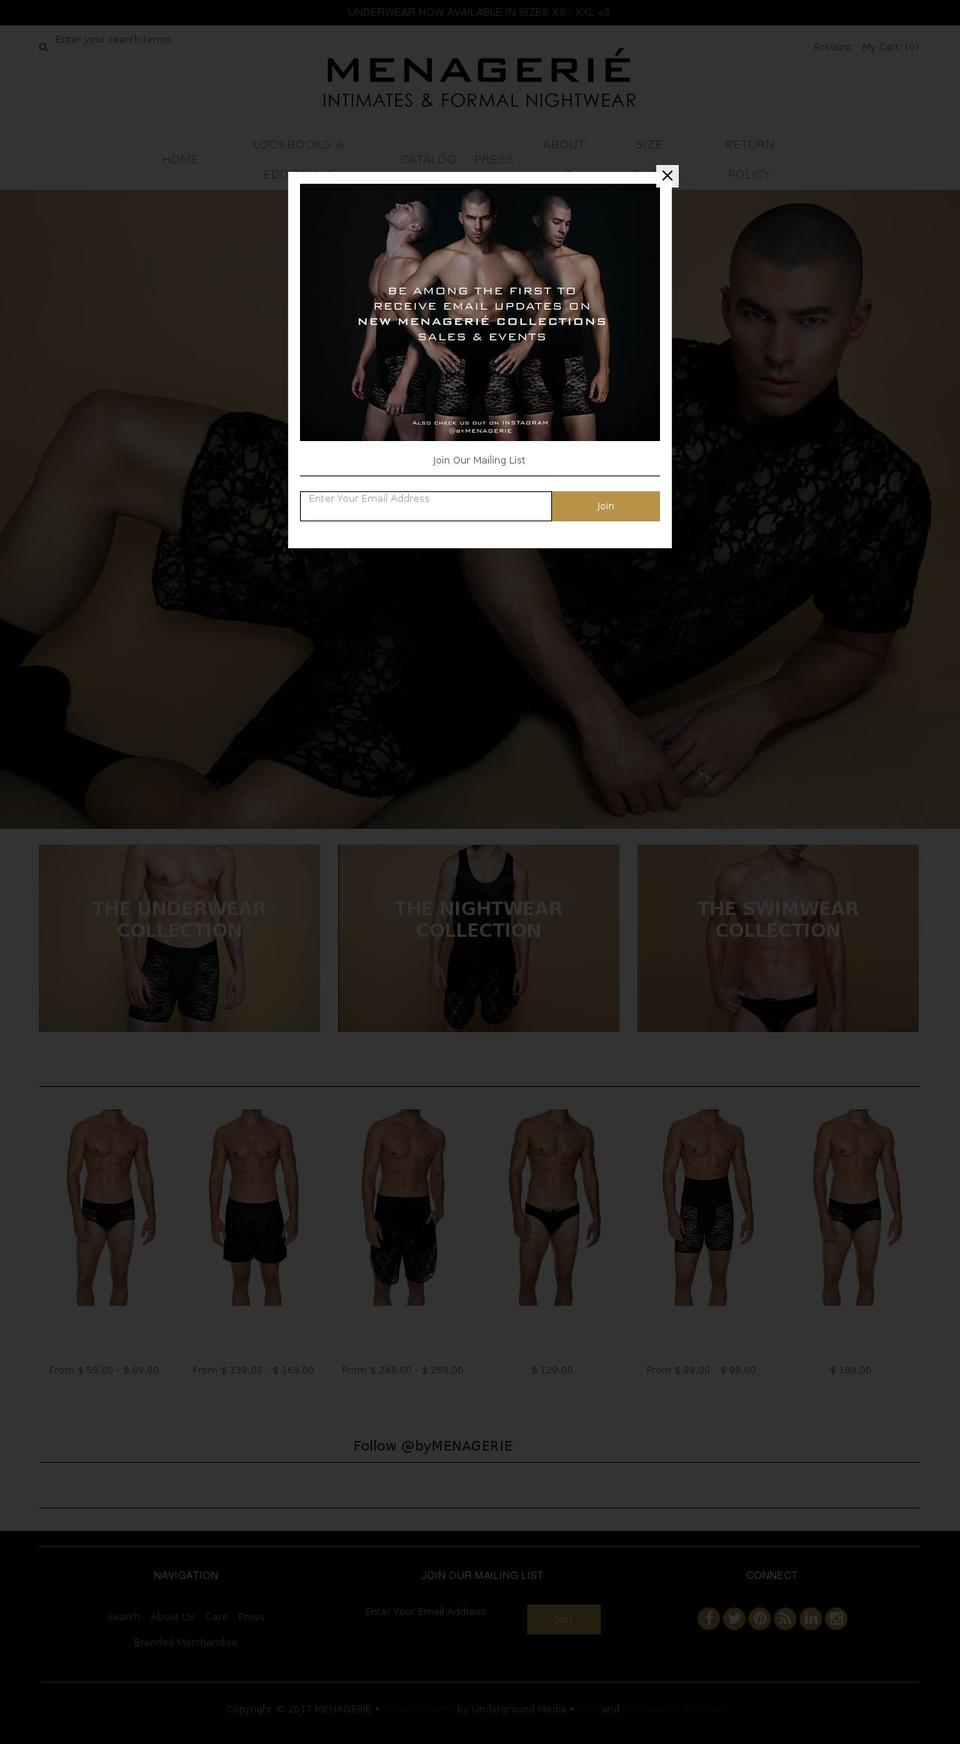 Stiletto Shopify theme site example bymenagerie.com